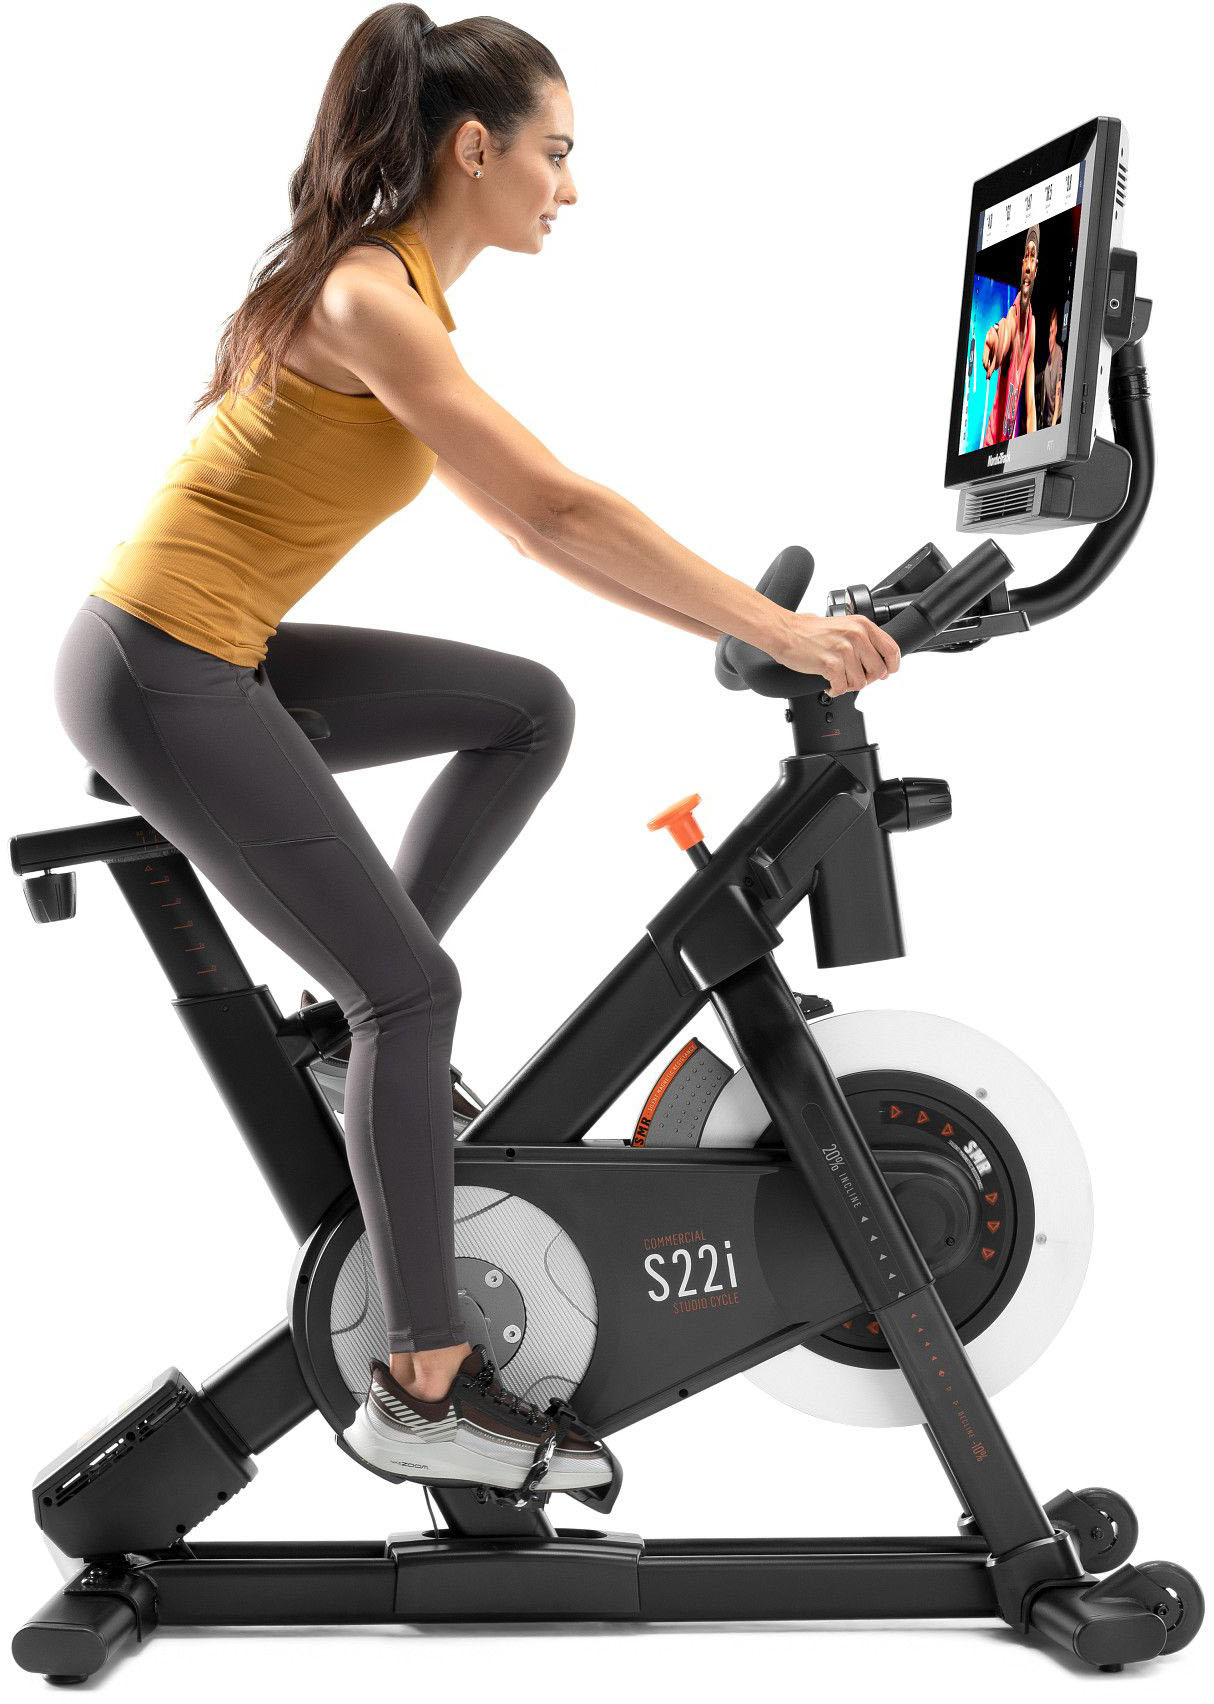 NordicTrack S221 Commercial Studio Cycle for sale online 